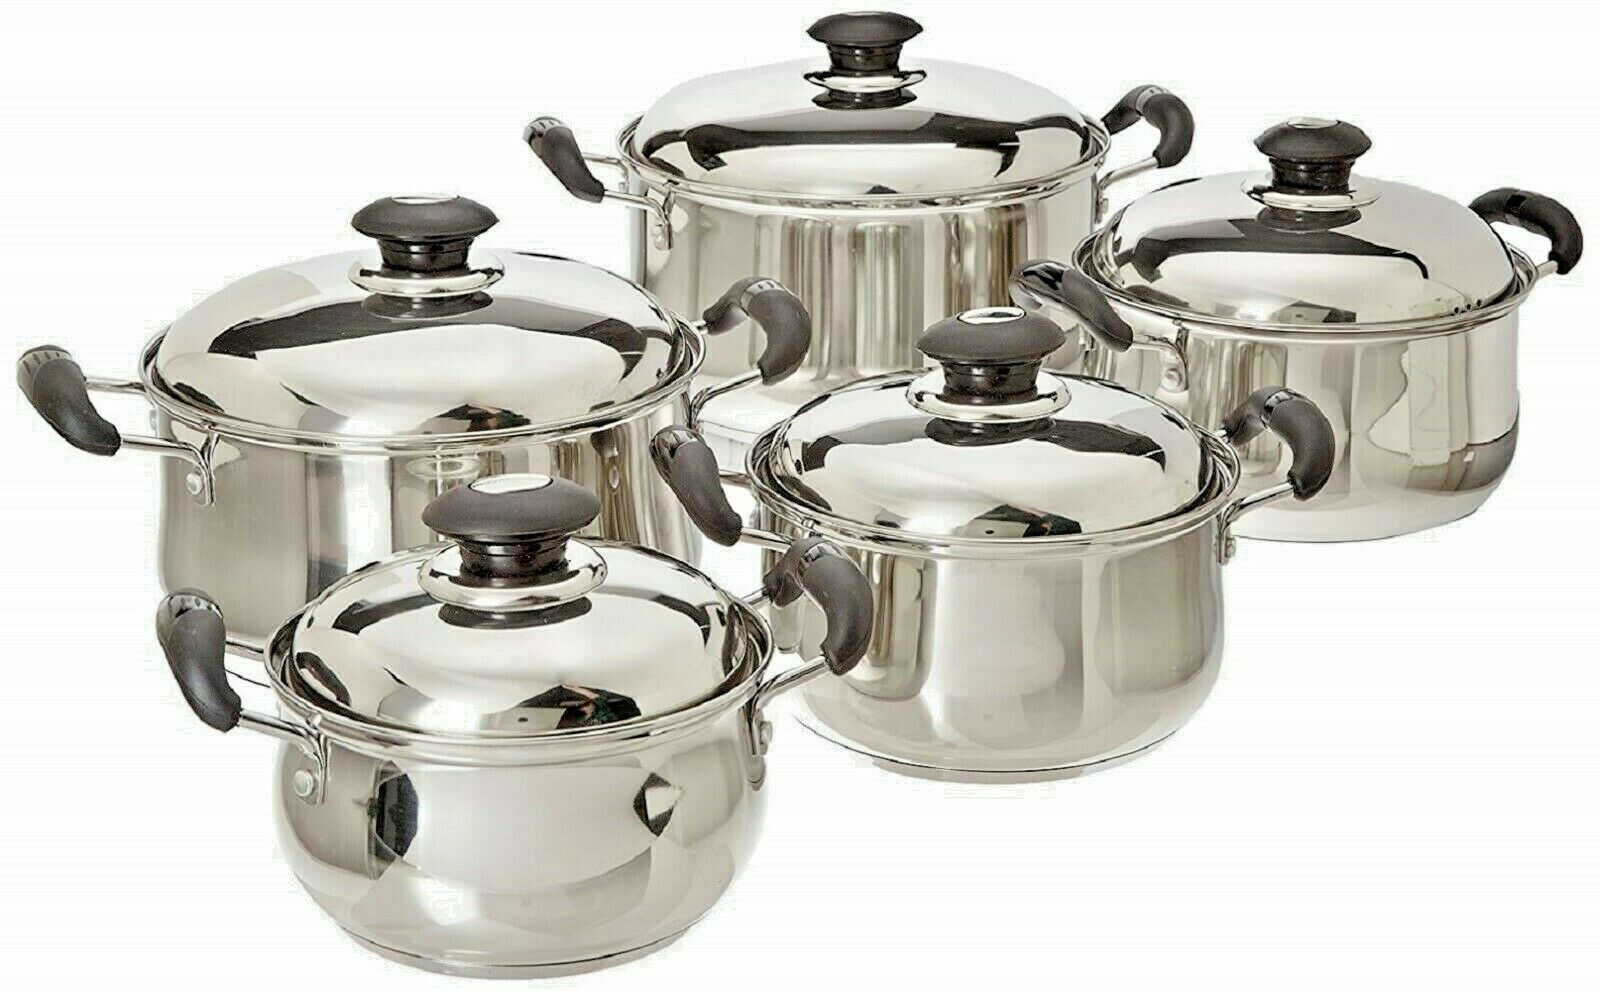 Stainless Steel Cookware Set Pots Sauce Pans 10 Pieces, Silver